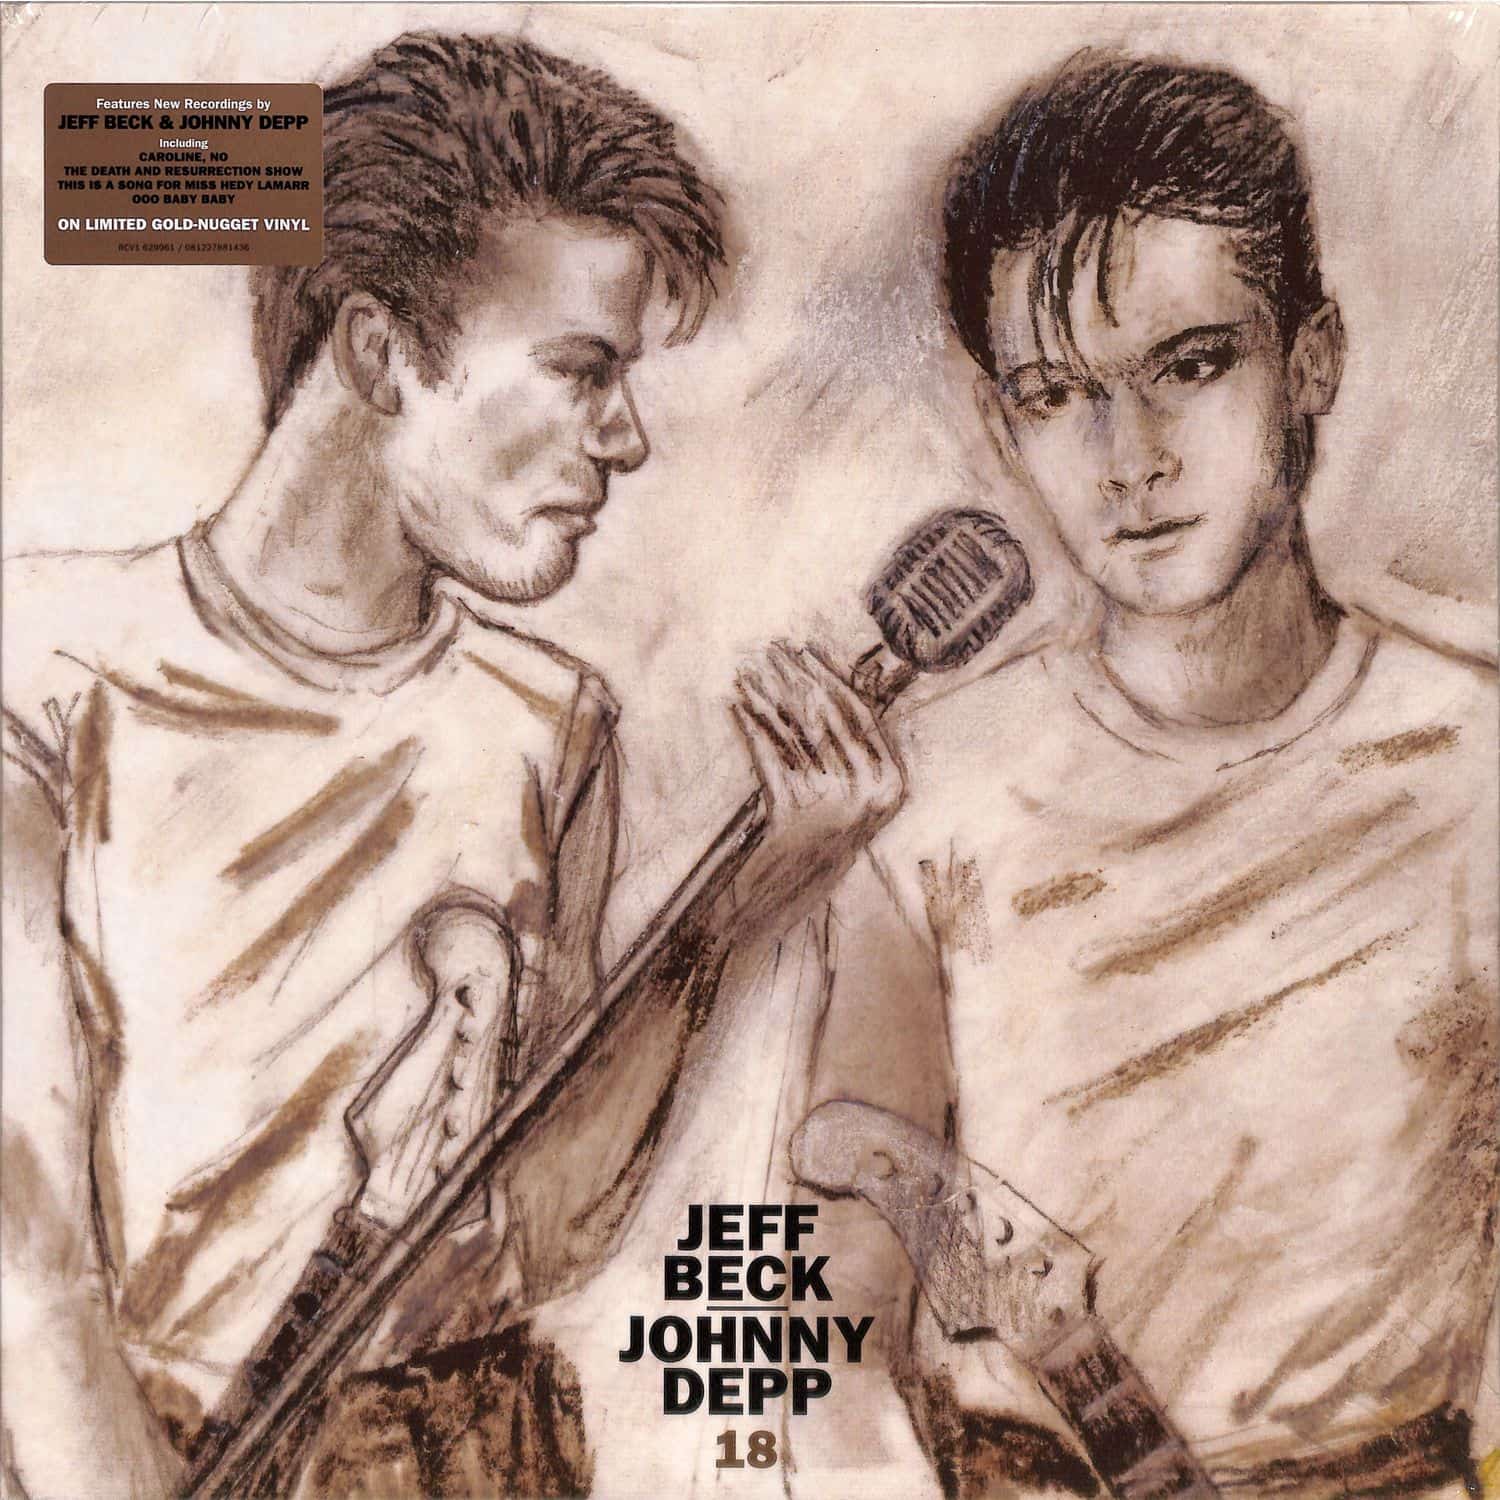 Jeff Beck and Johnny Depp - 18 